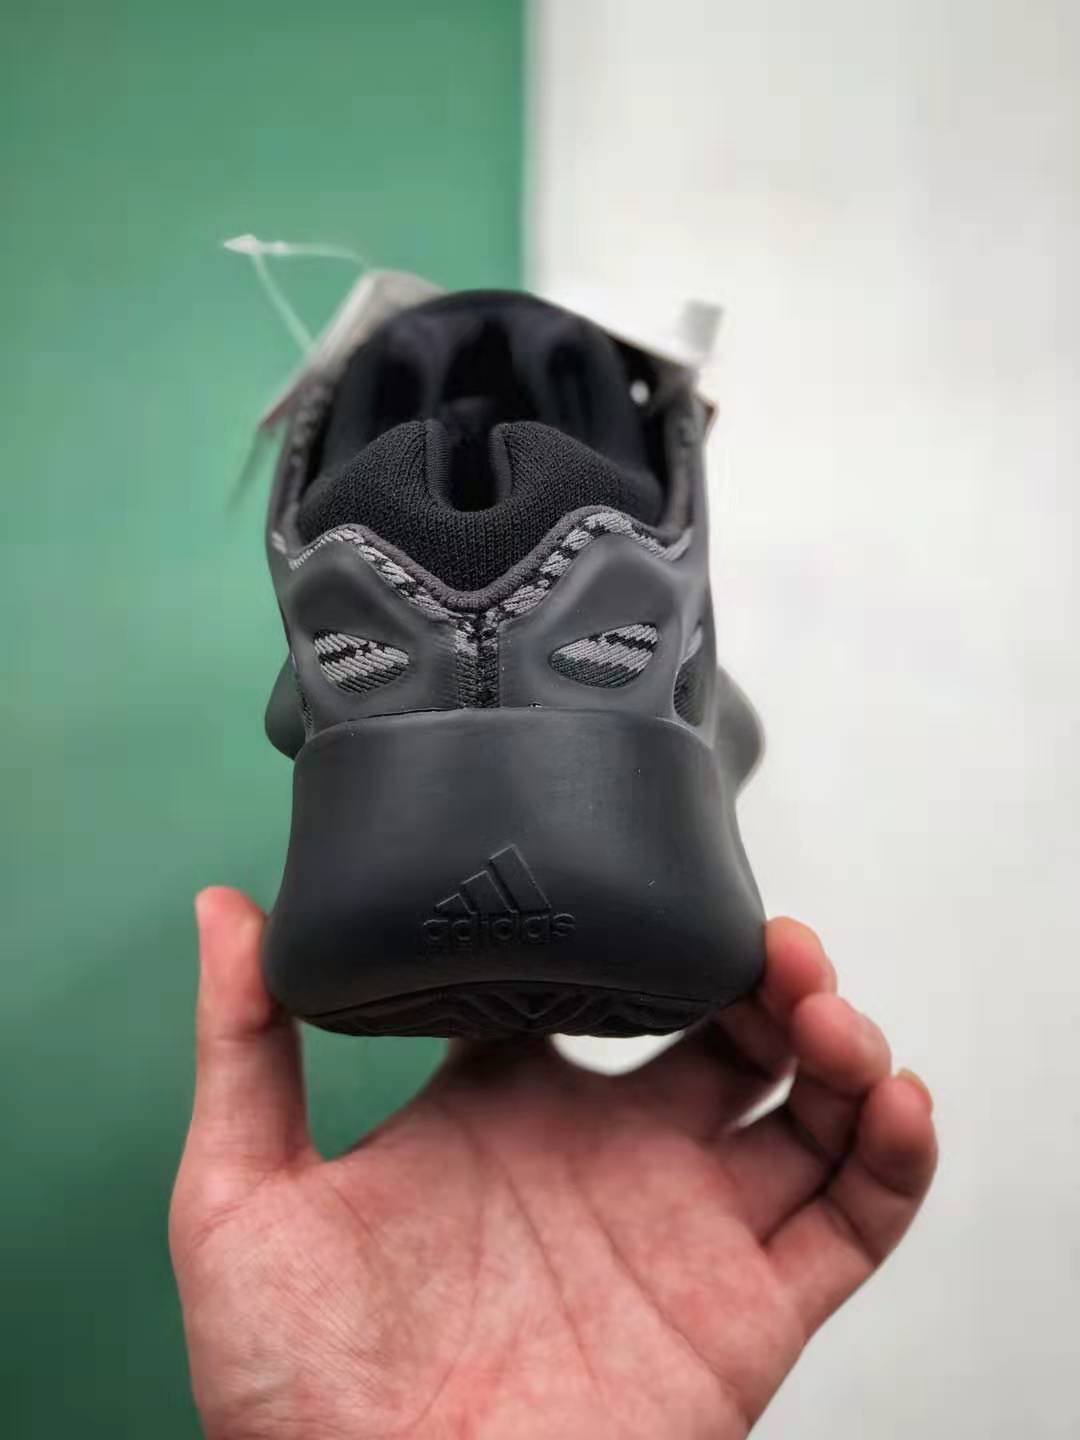 Adidas Yeezy 700 V3 Alvah H67799 - Sleek and Stylish Footwear for Sneaker Enthusiasts!